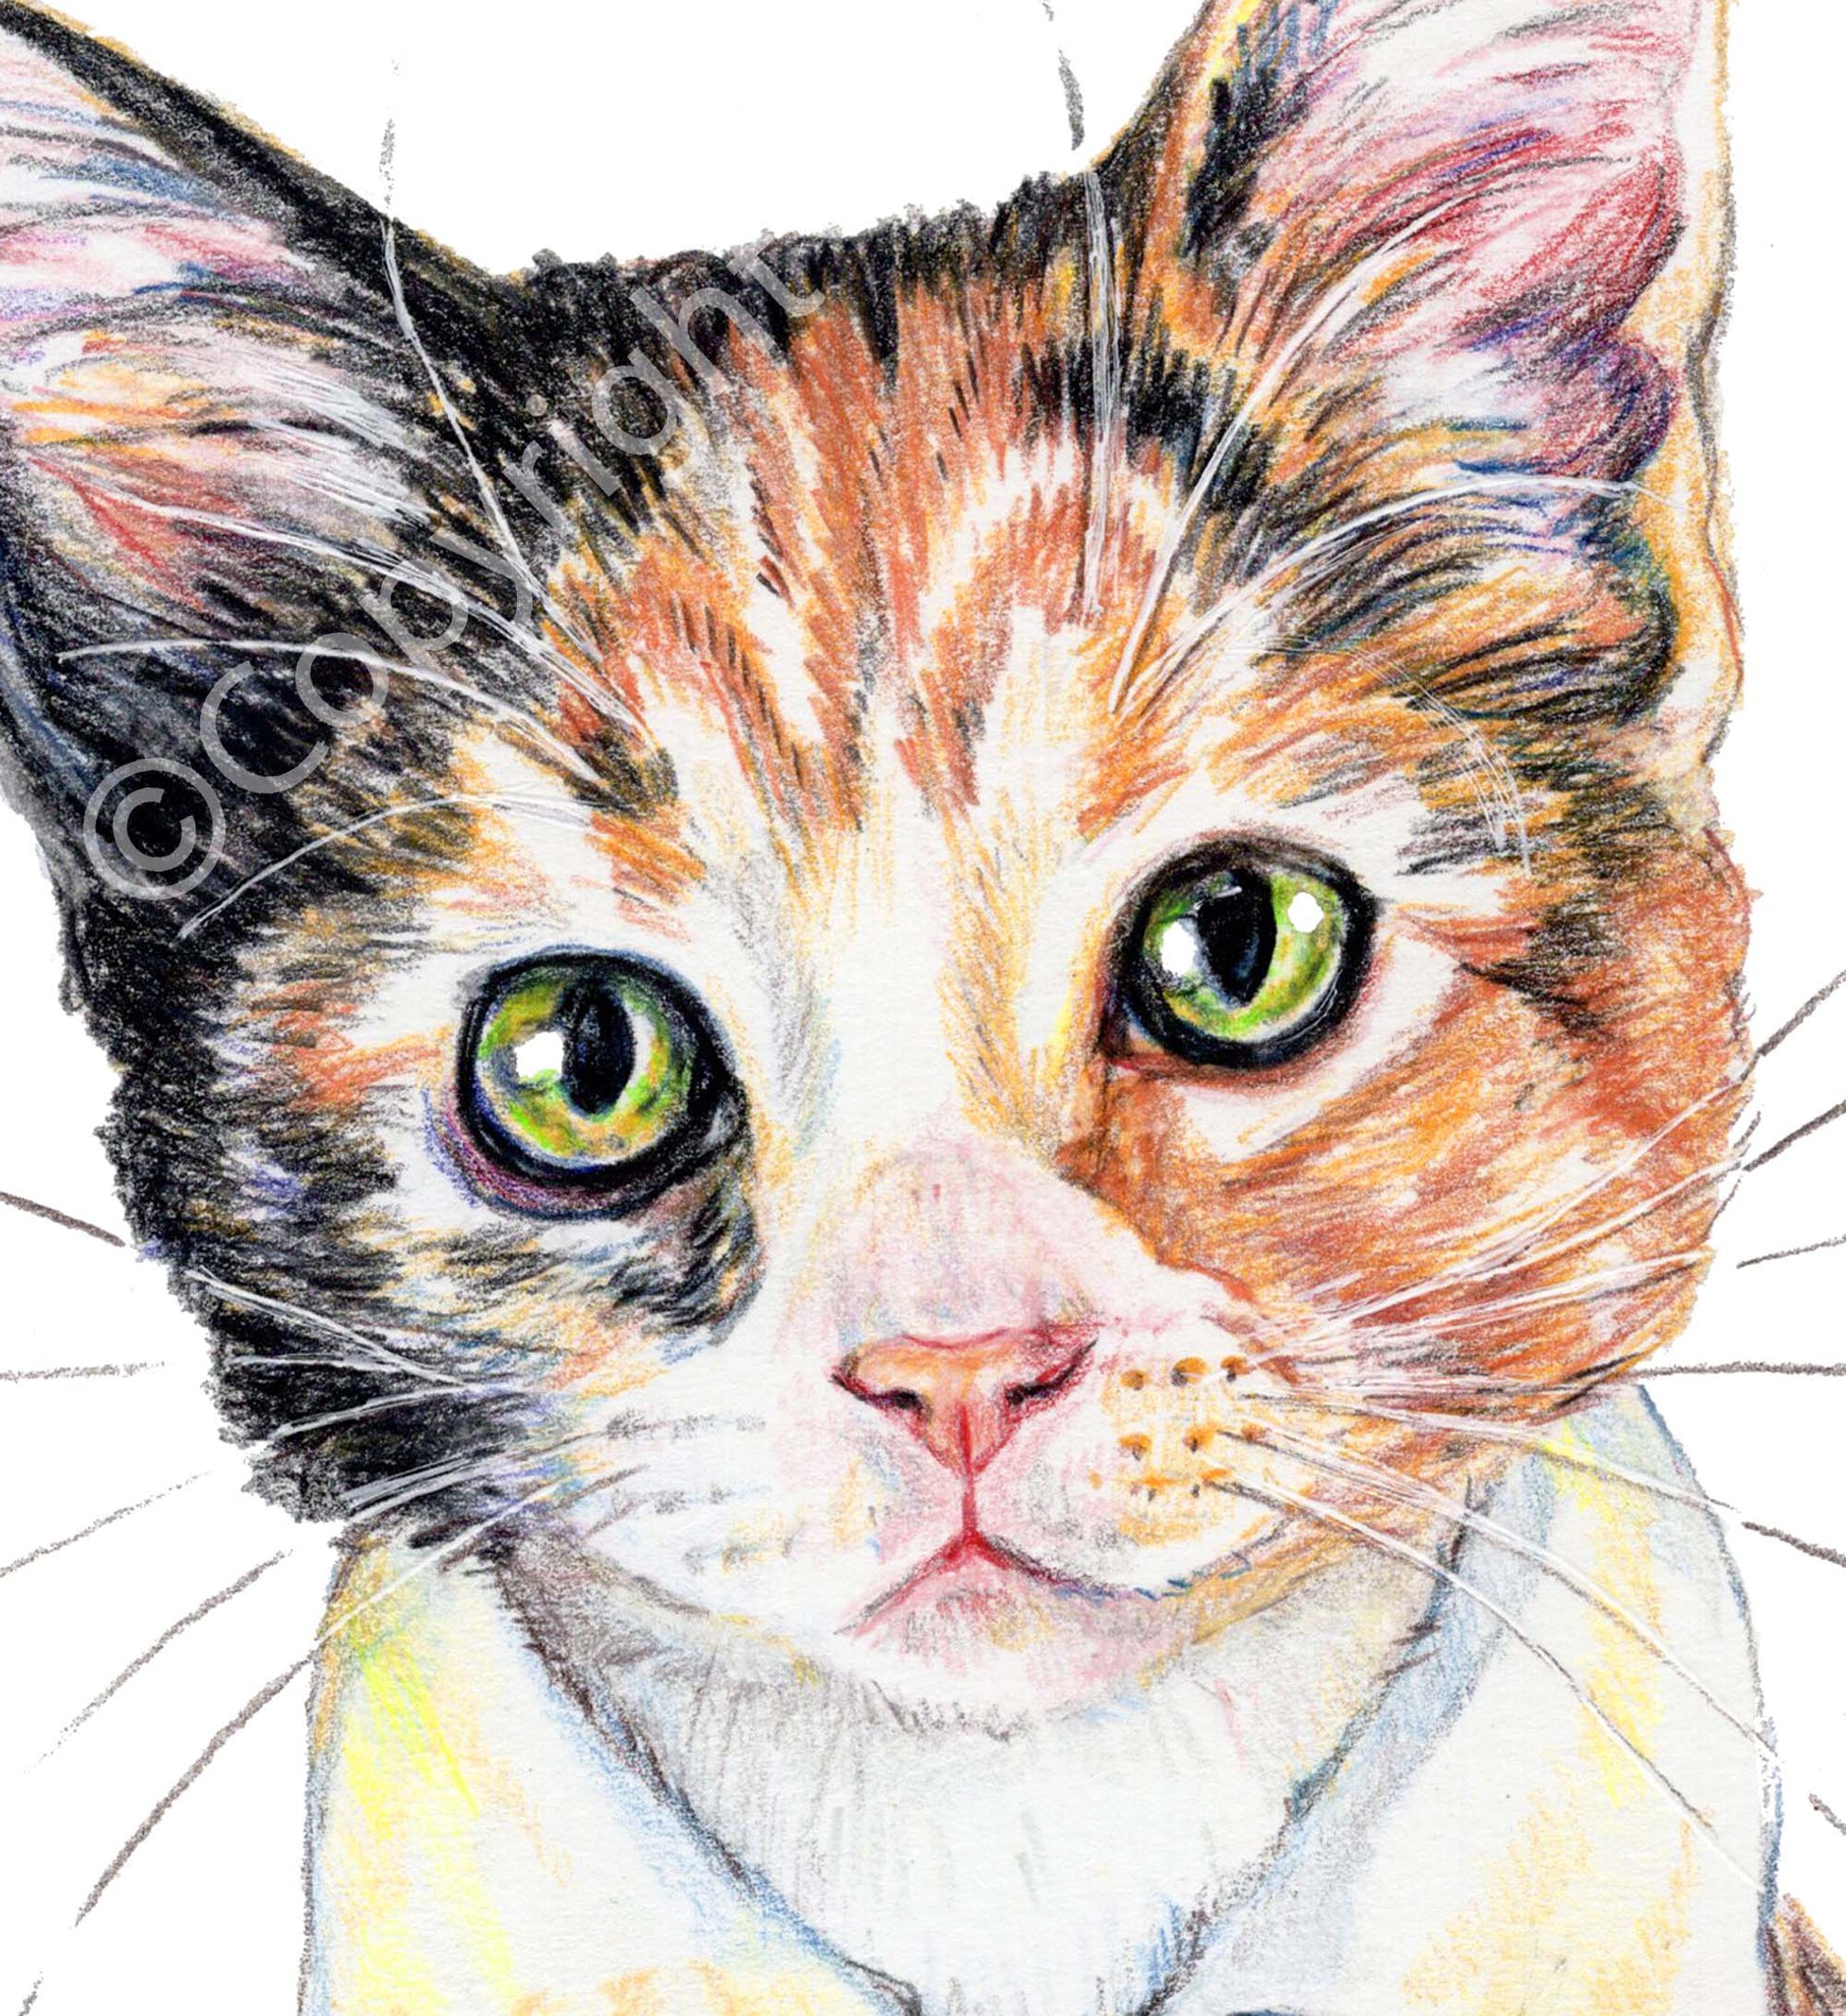 Coloured Pencil drawing of a calico kitten cat wearing a Romantic-style cravat. Art by Deidre Wicks